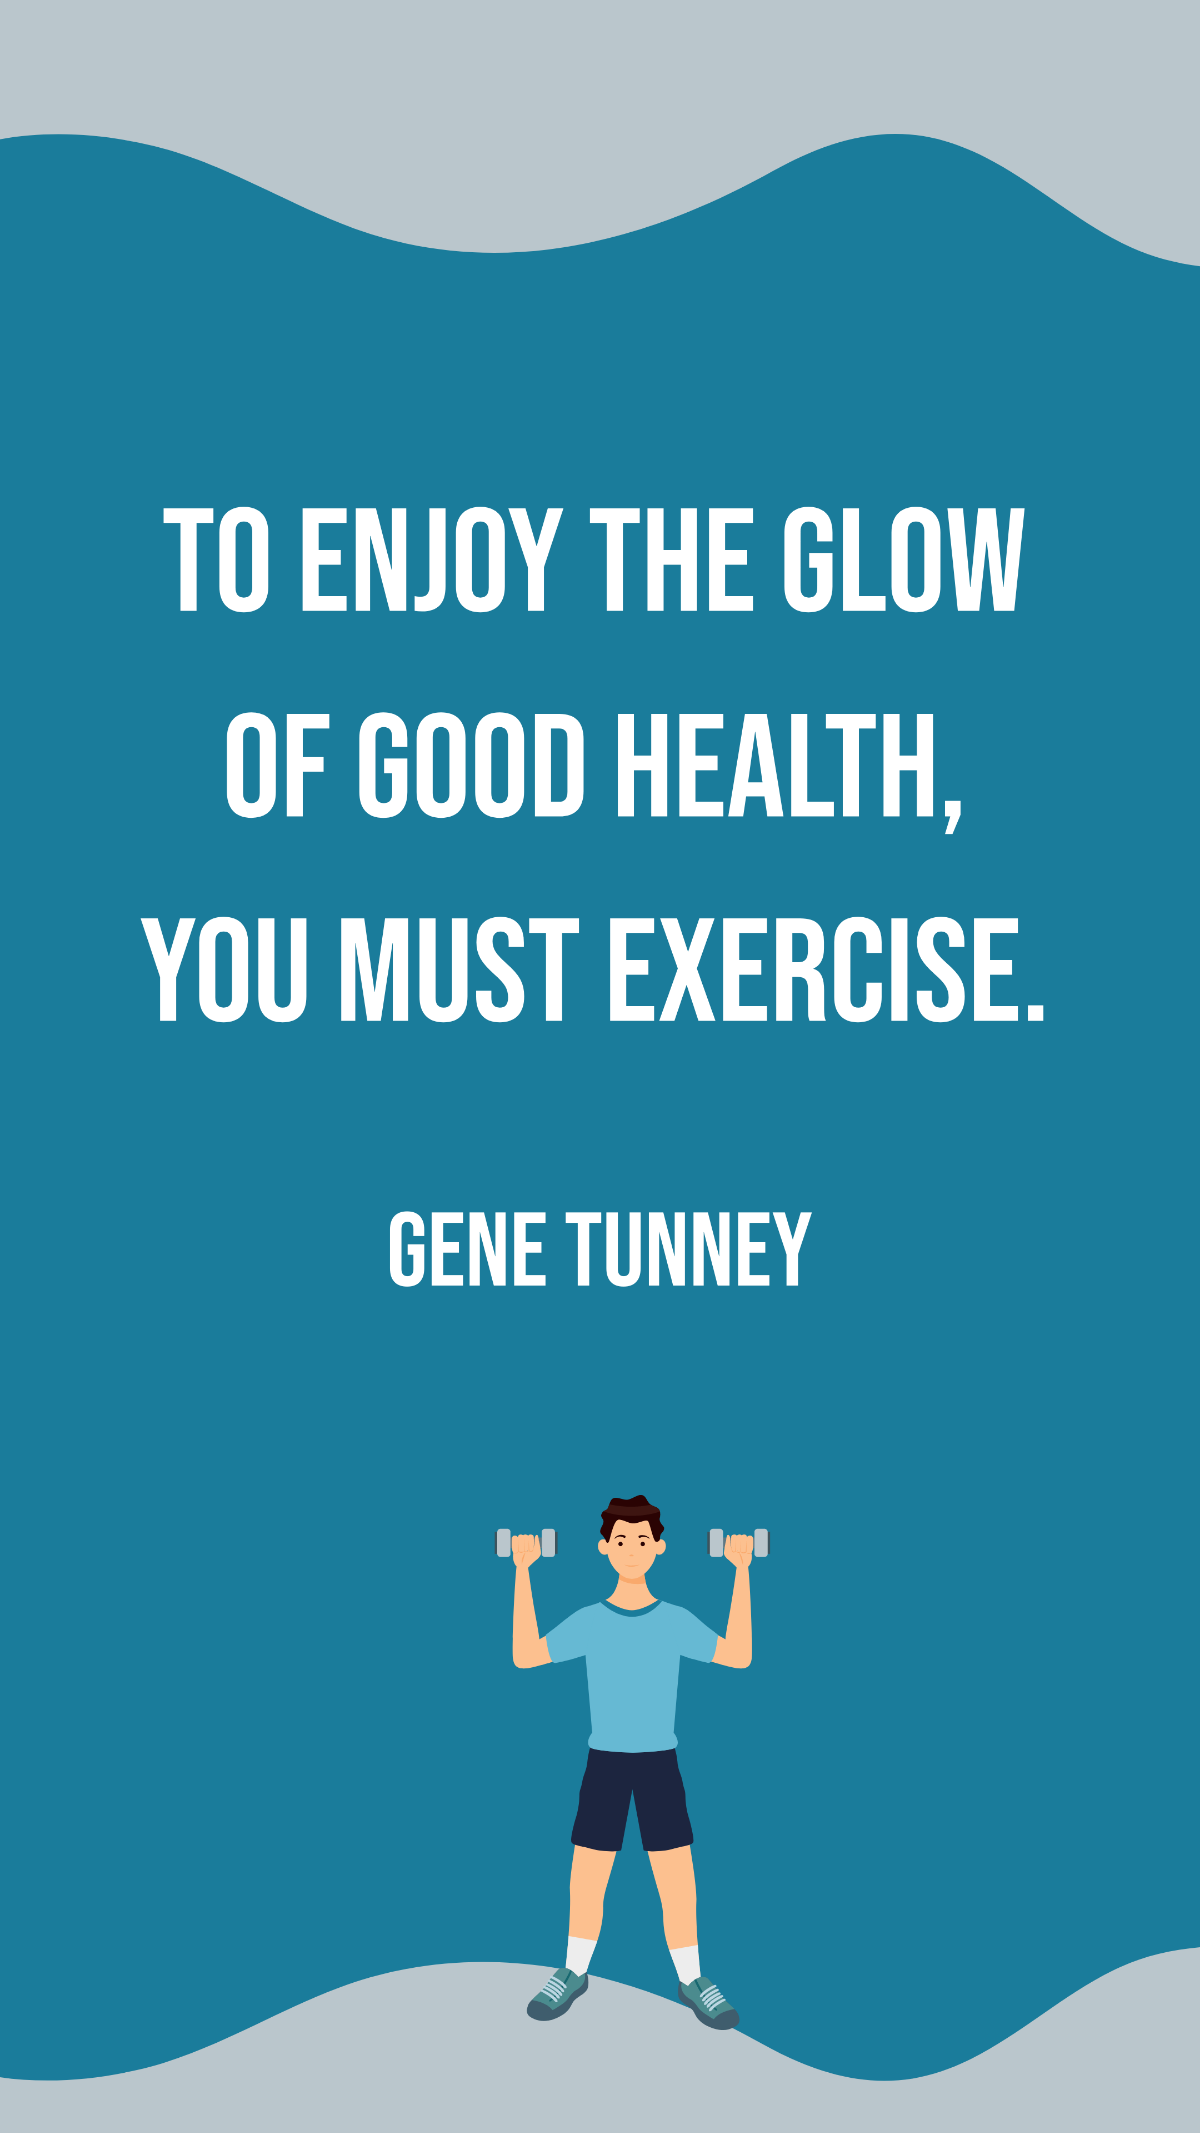 Gene Tunney - To enjoy the glow of good health, you must exercise.